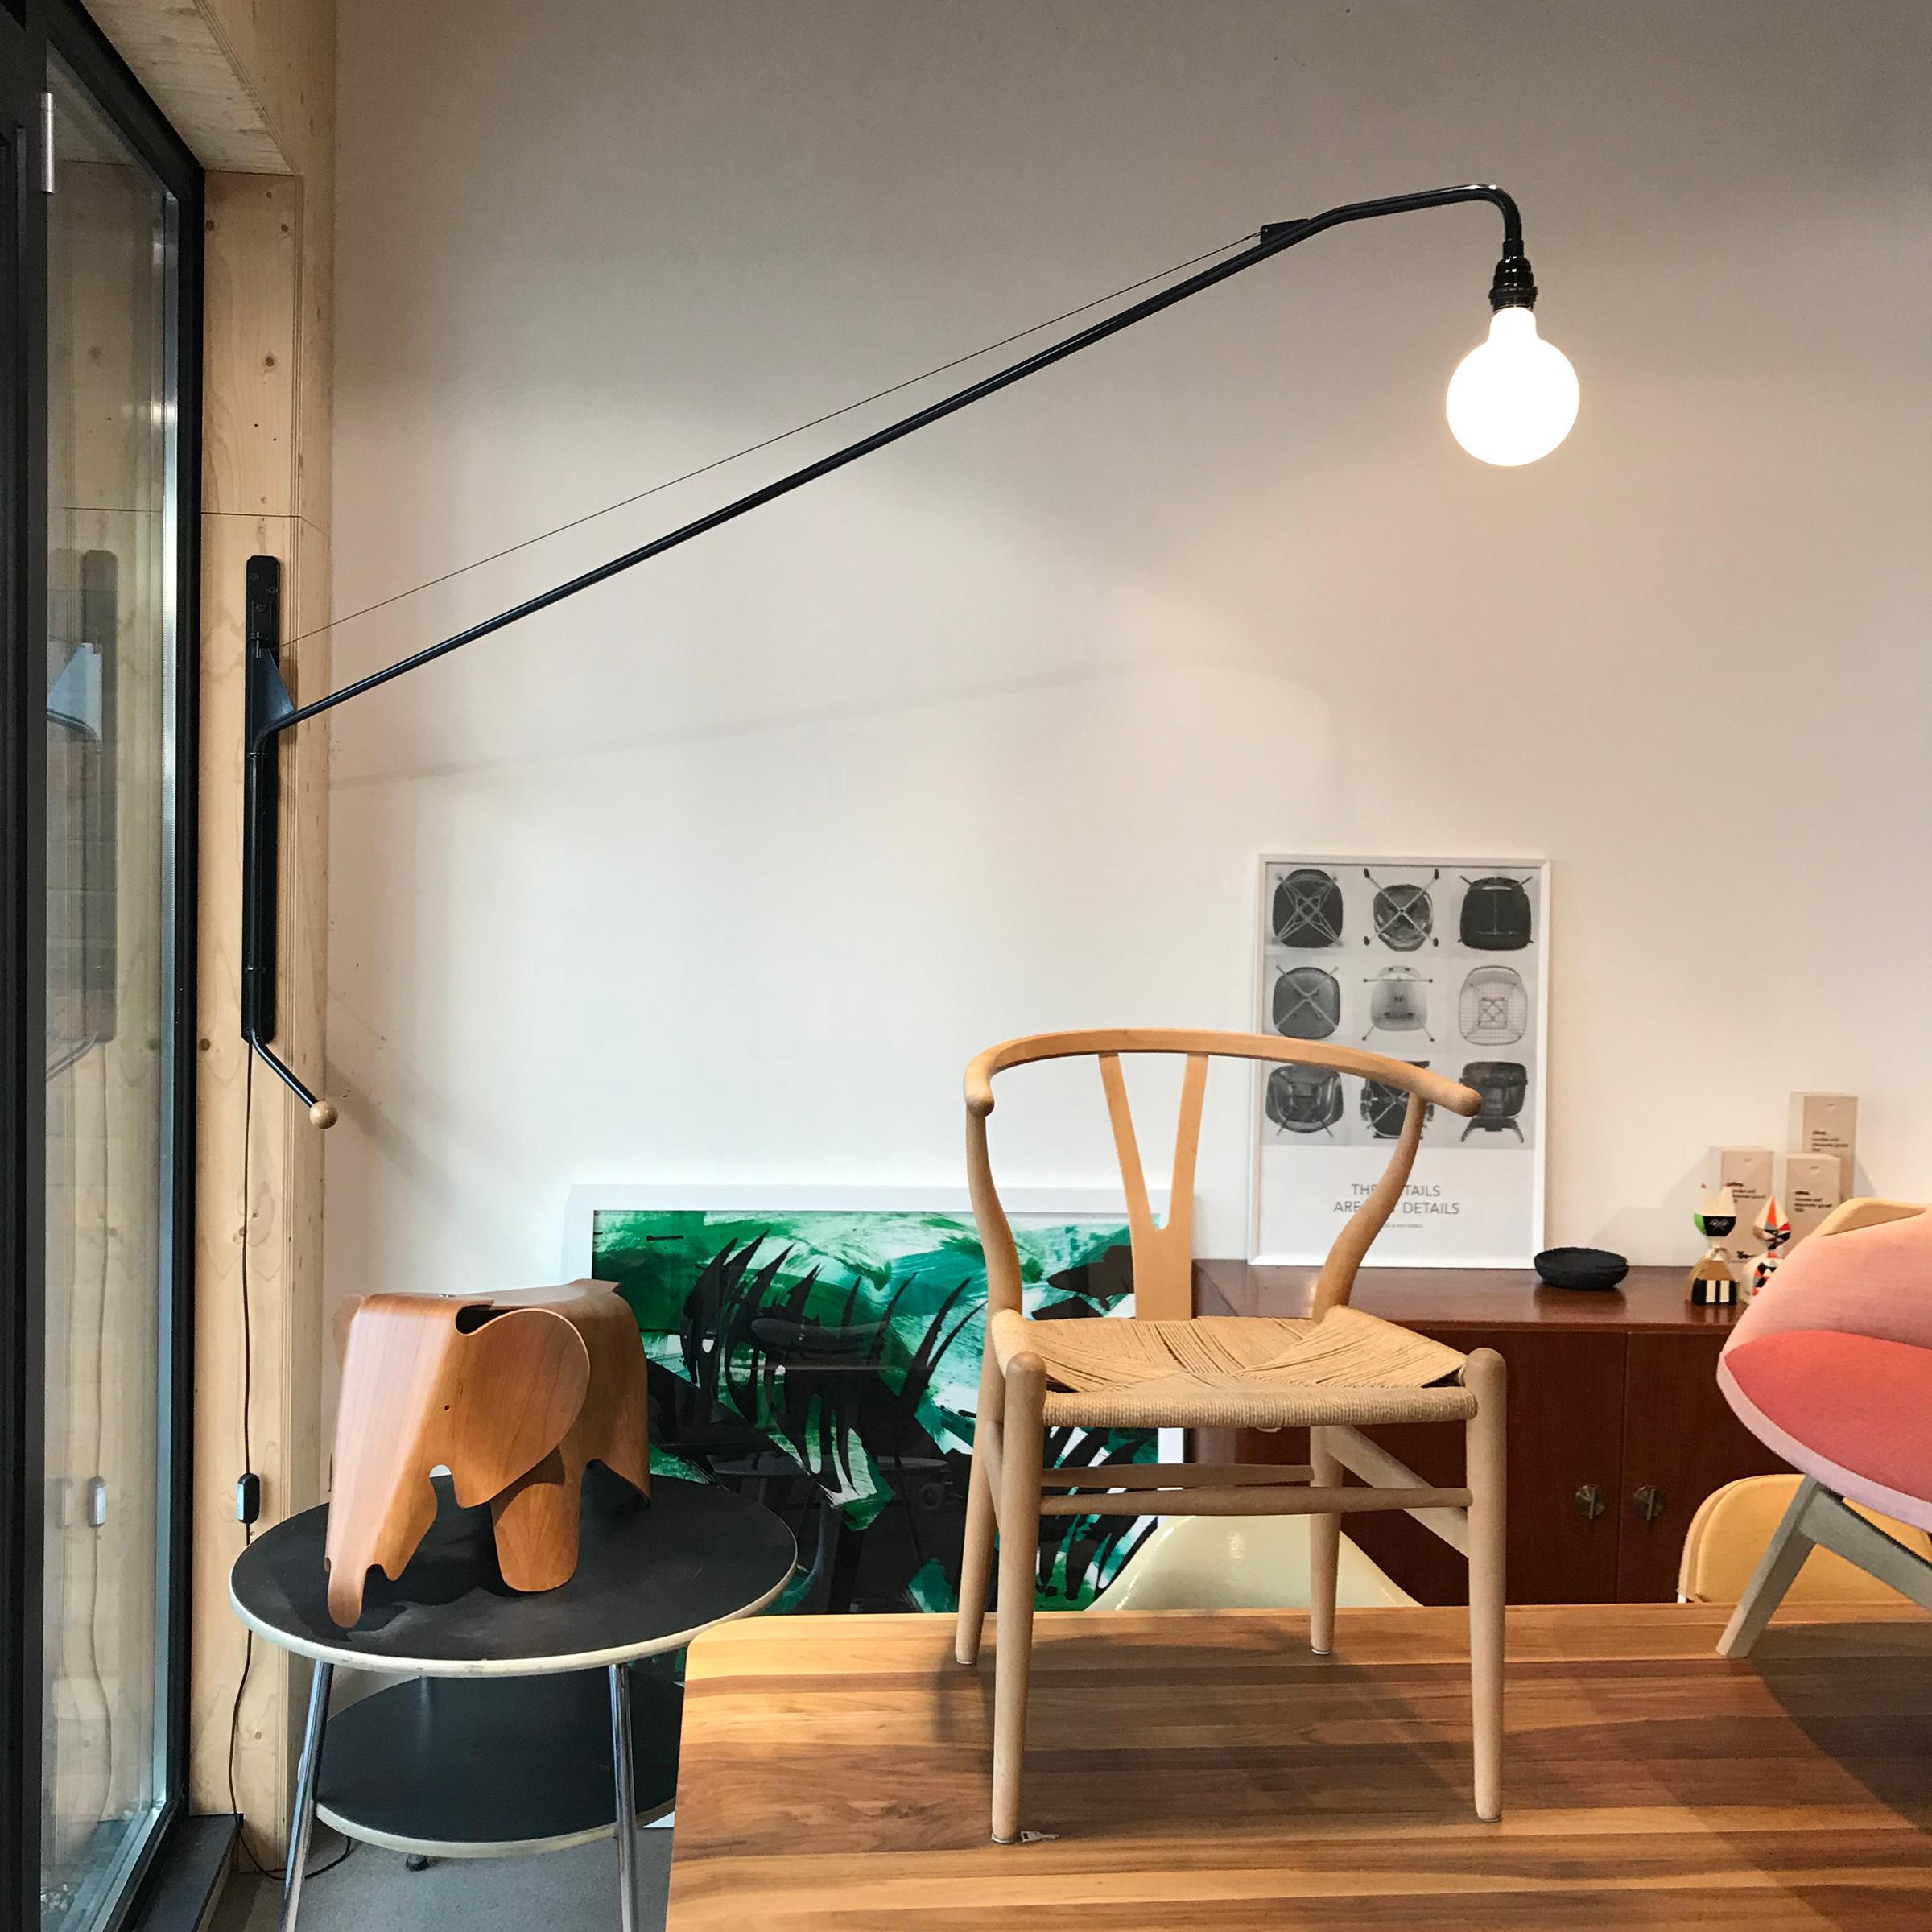 Industrial and minimalistic wall lamp designed by Jean Prouvé and produced by Vitra. The Potence swiveling wall lamp was designed by Jean Prouvé for the 'Maison Tropique' and is considered a purist masterpiece. What makes this lamp special is the